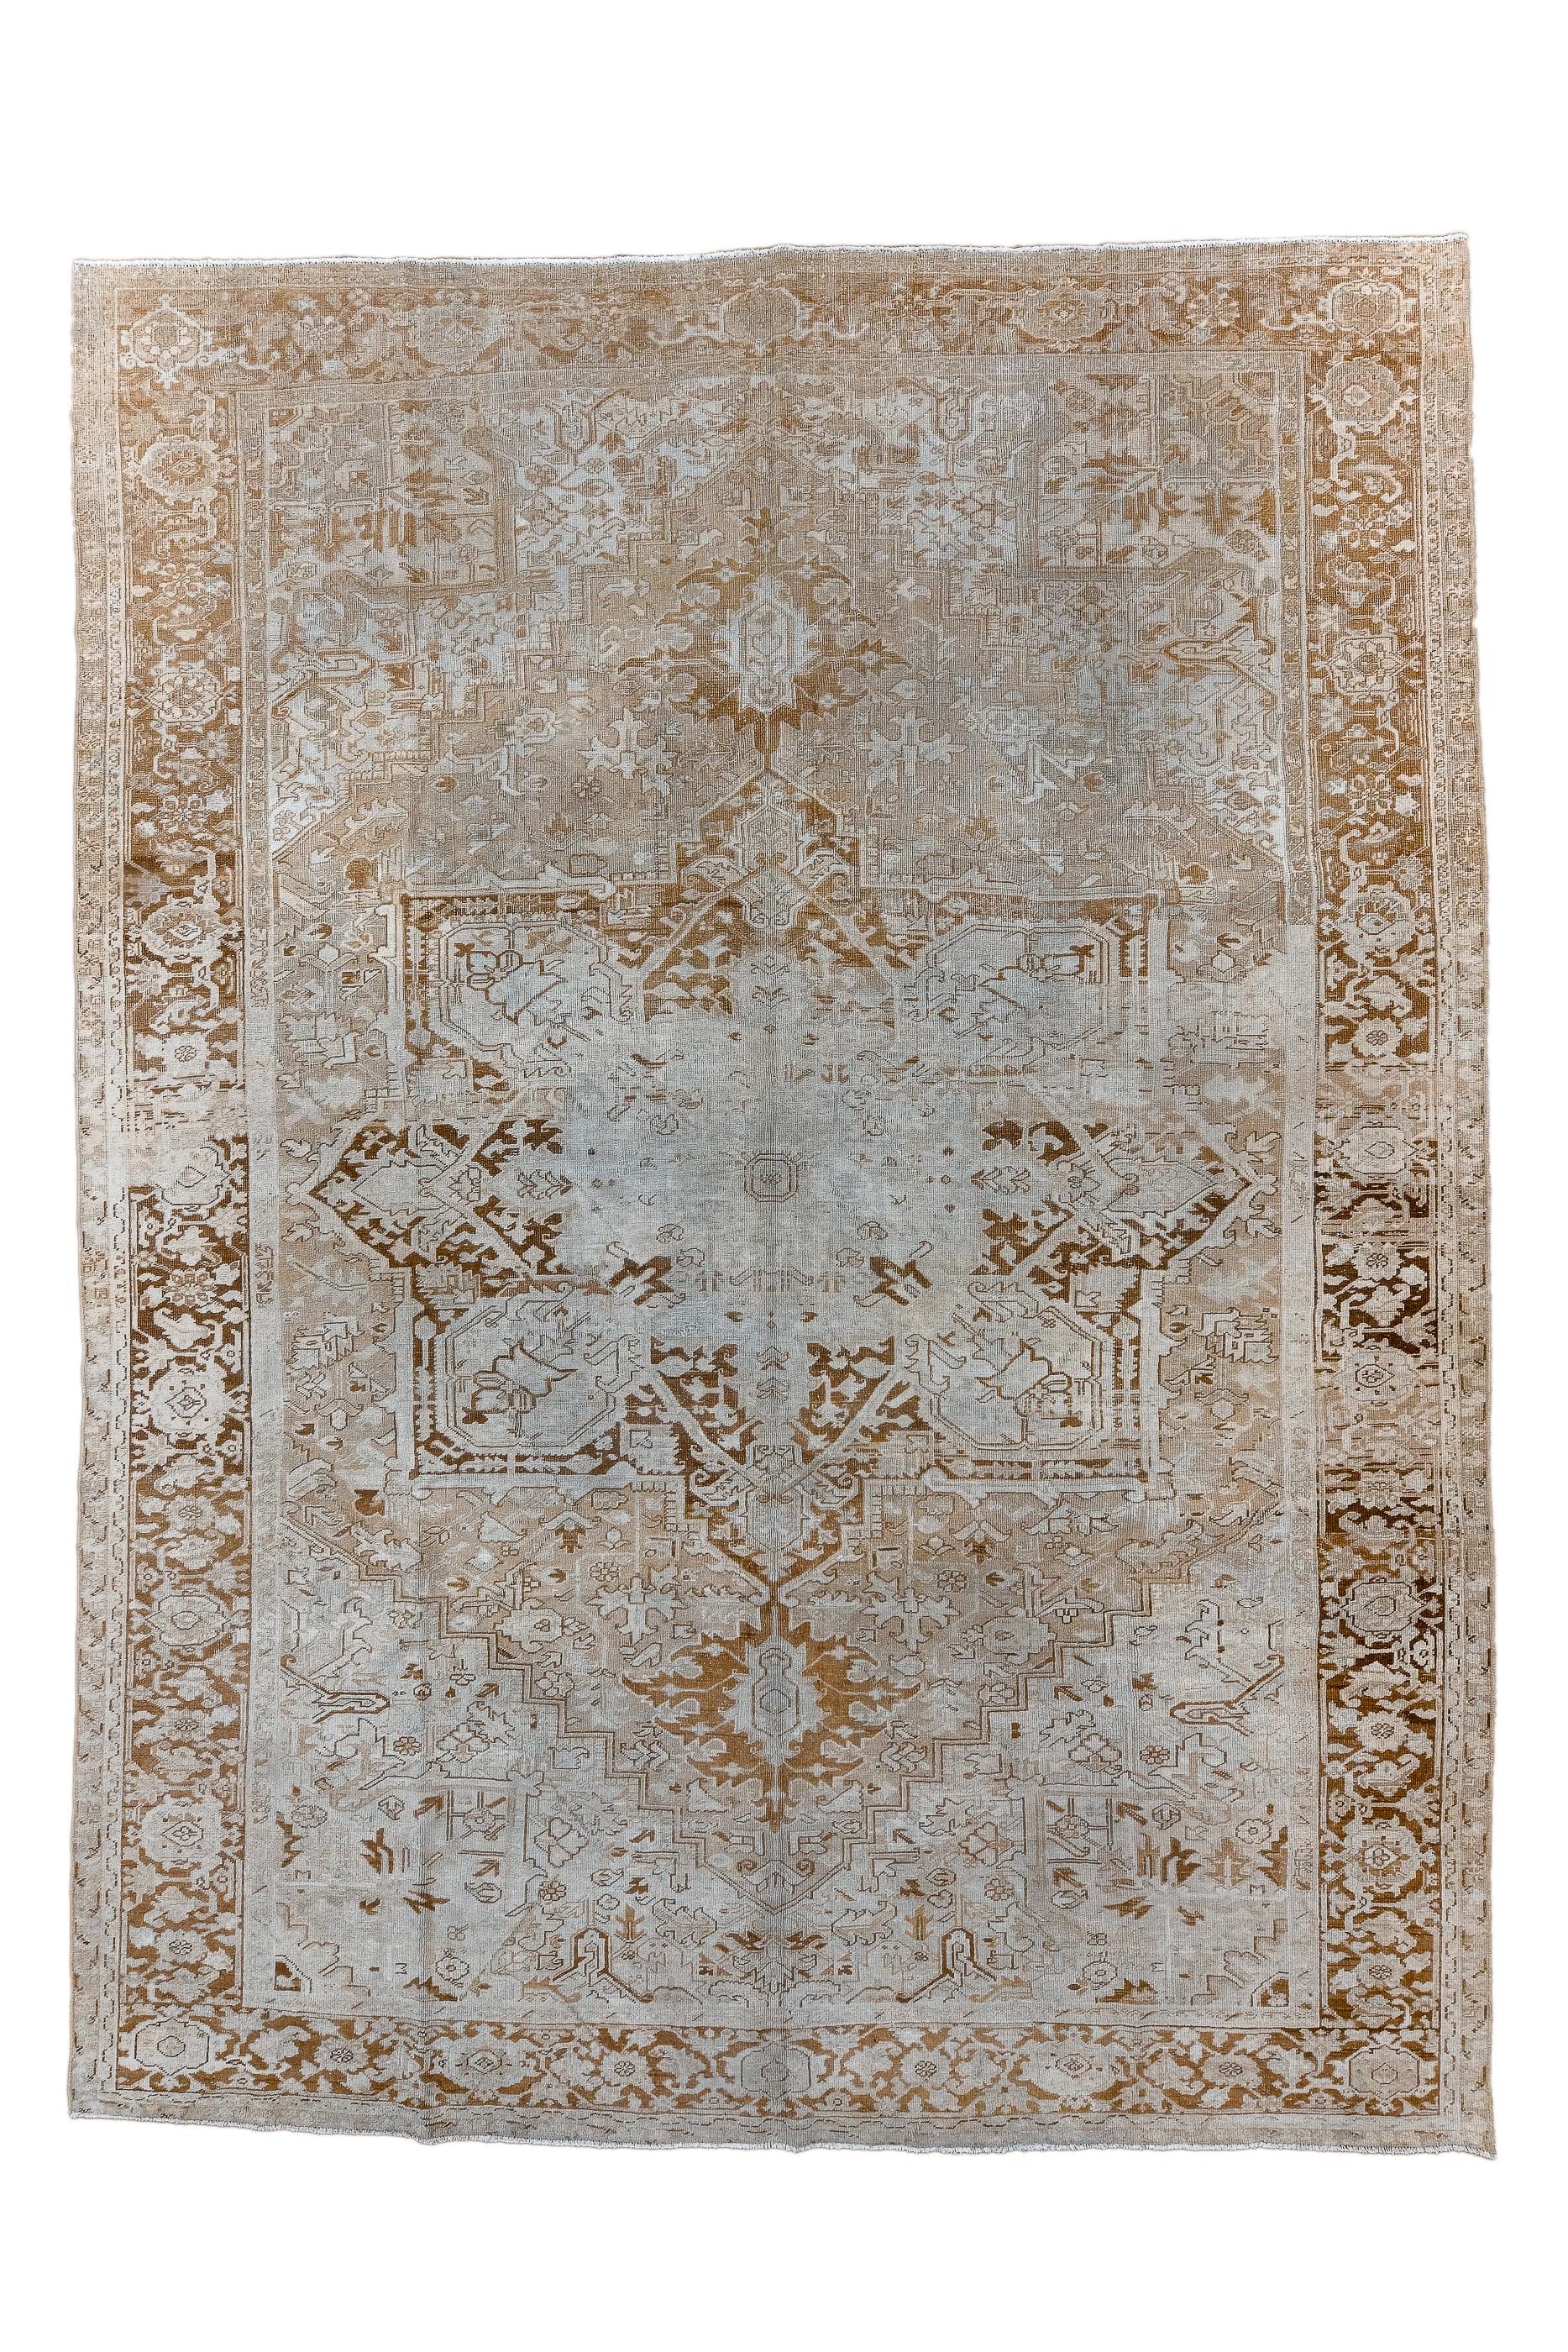 Somewhat distressed, with a light overall palette, this coarsely woven village carpet shows  a pendanted, near black octogramme medallion on a rose-terra cotta field.  Stepped ecru corners.  Brick strip style main border with standard reversing